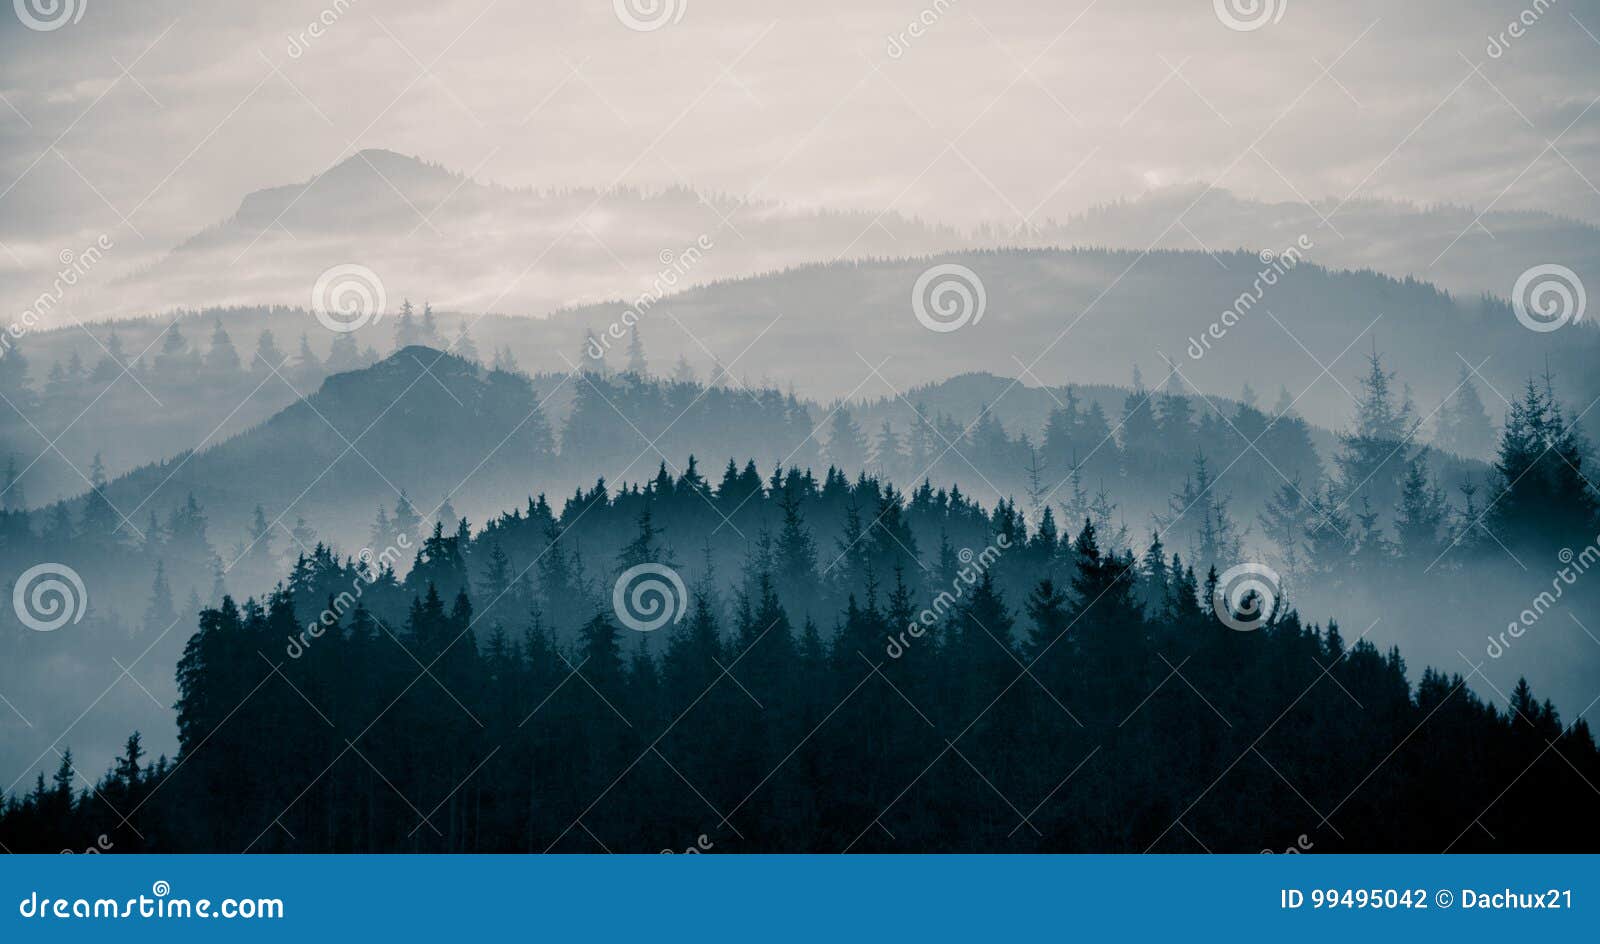 a beautiful, abstract monochrome mountain landscape in blue tonality.